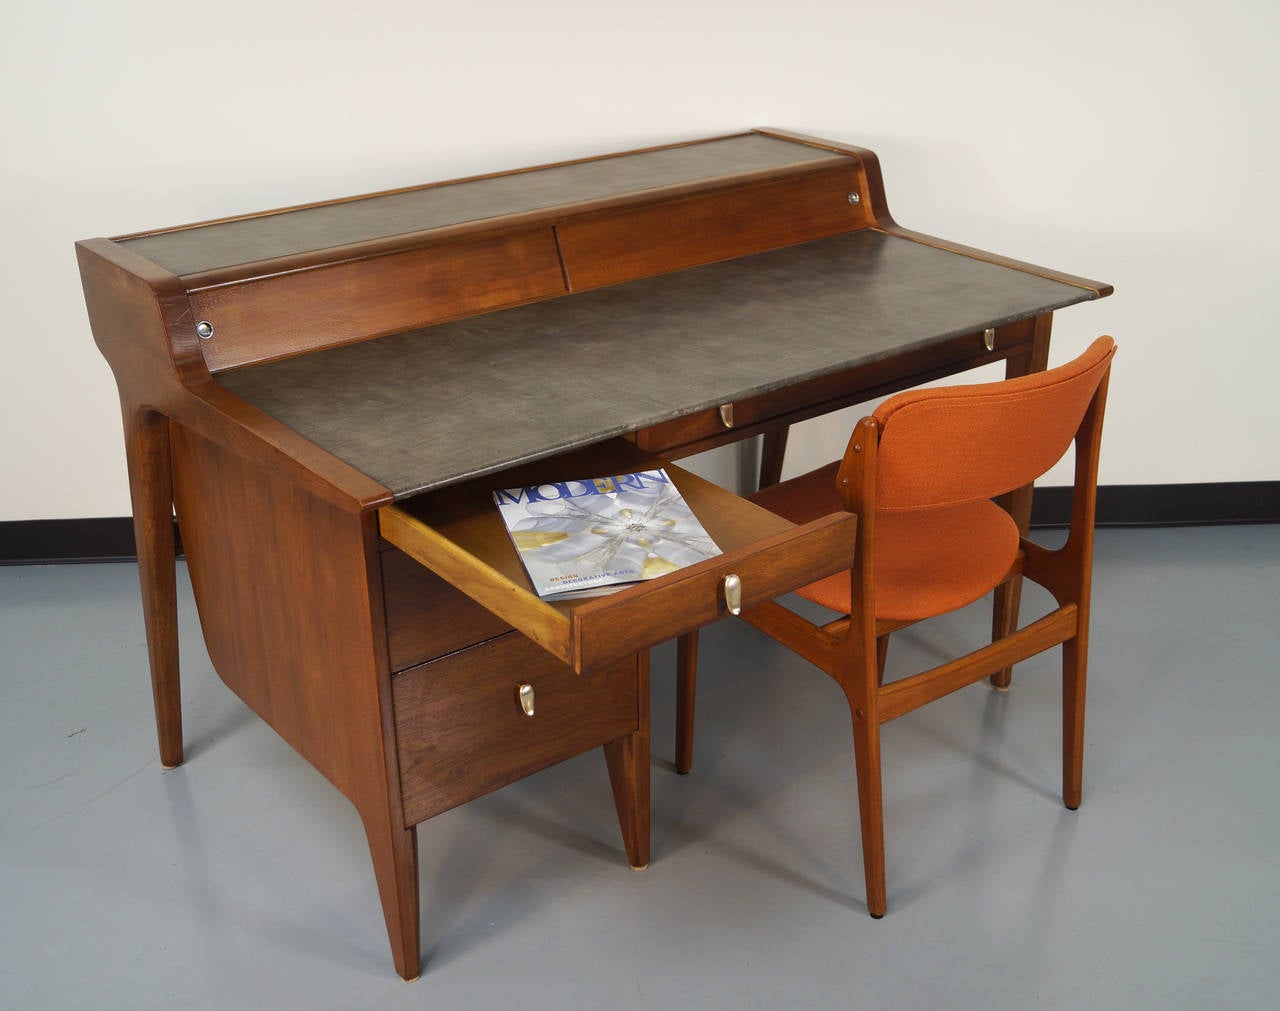 This Modernist desk derives it beauty from its lines and its incredible craftsmanship. It was designed by John Van Koert for the Drexel Profile series. The back of the desk is as amazing as the front, so it can float in the middle of a room. Desk